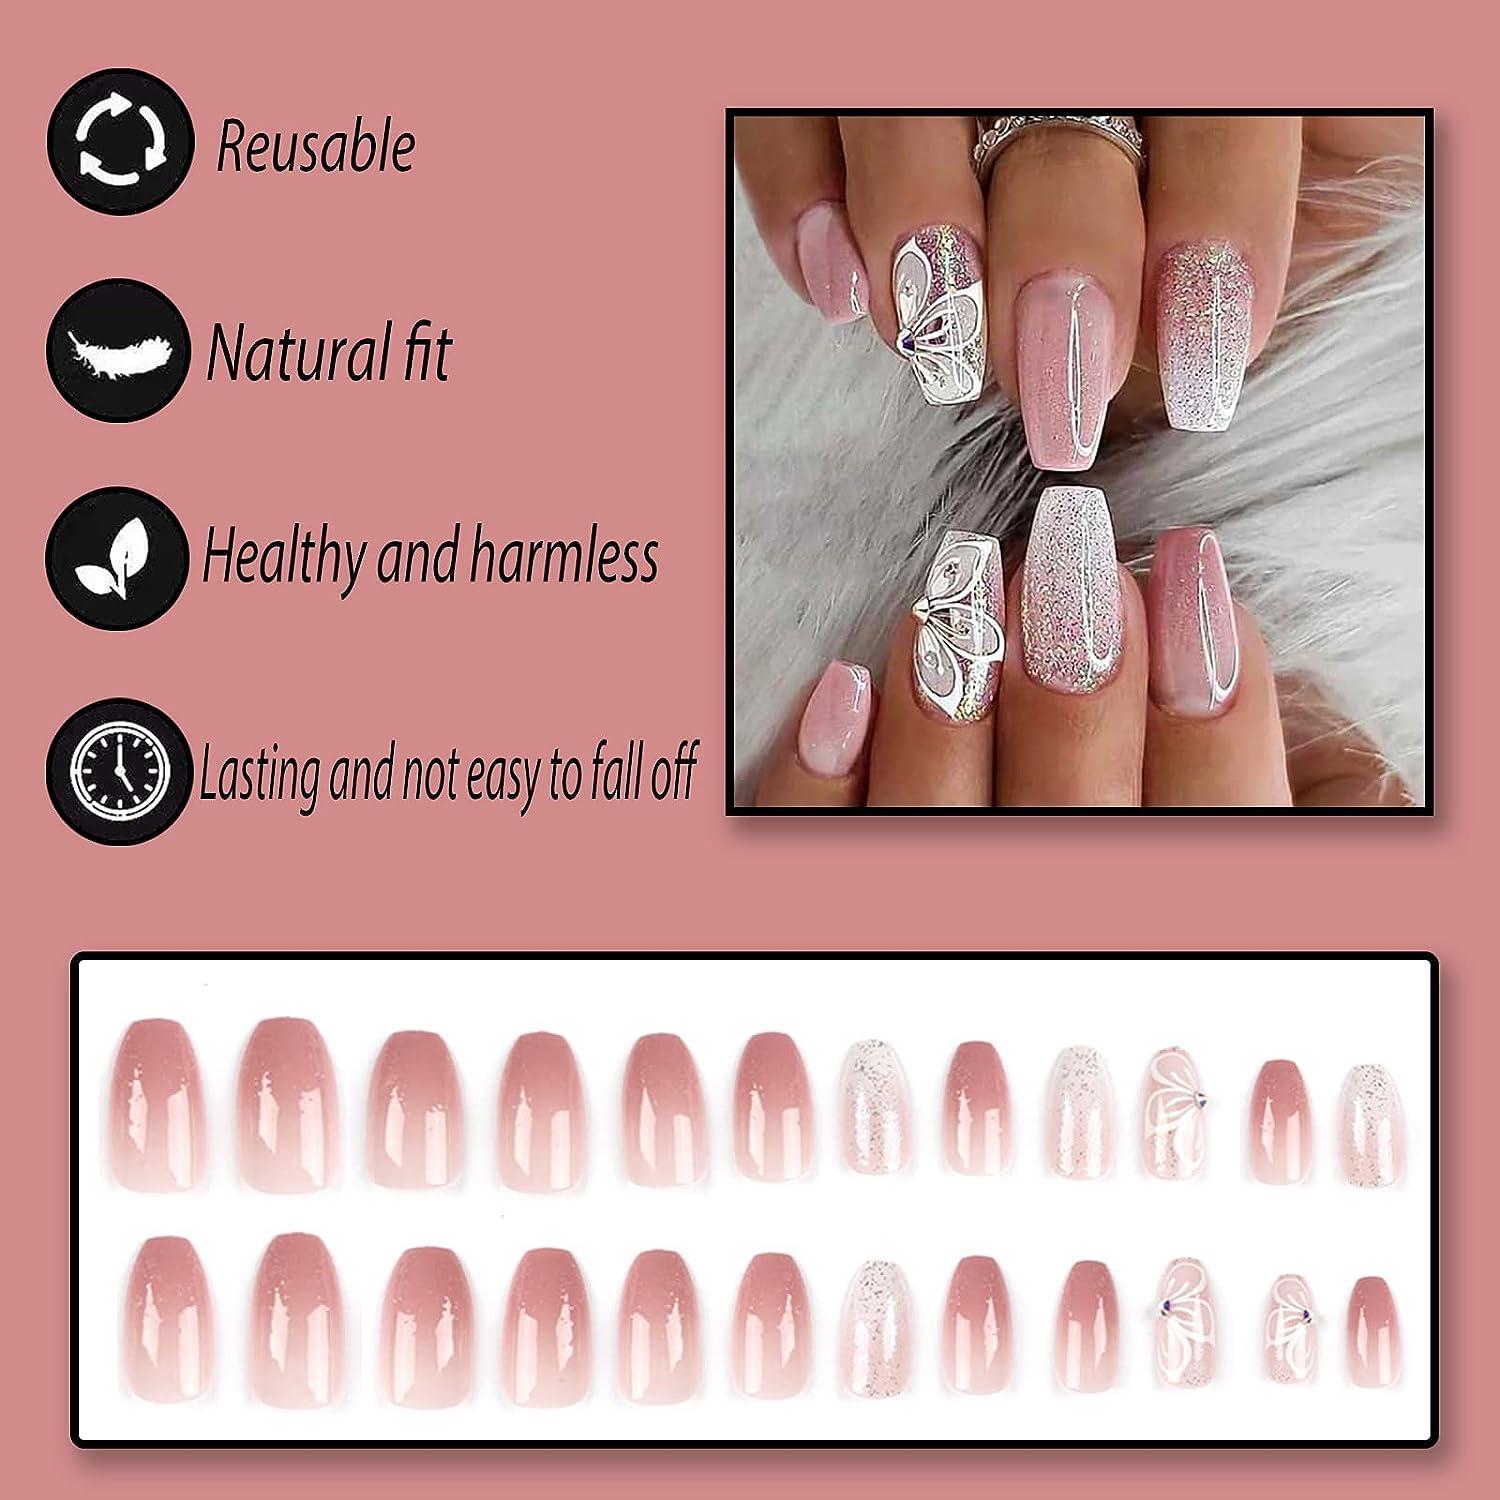  Coffin Press on Nails Medium Length Fake Nails Glitter Pink  Gradient False Nails Design Glossy Full Cover Artificial Acrylic Nails  Reusable Stick on Nails Natural Fit Glue on Nail for Women